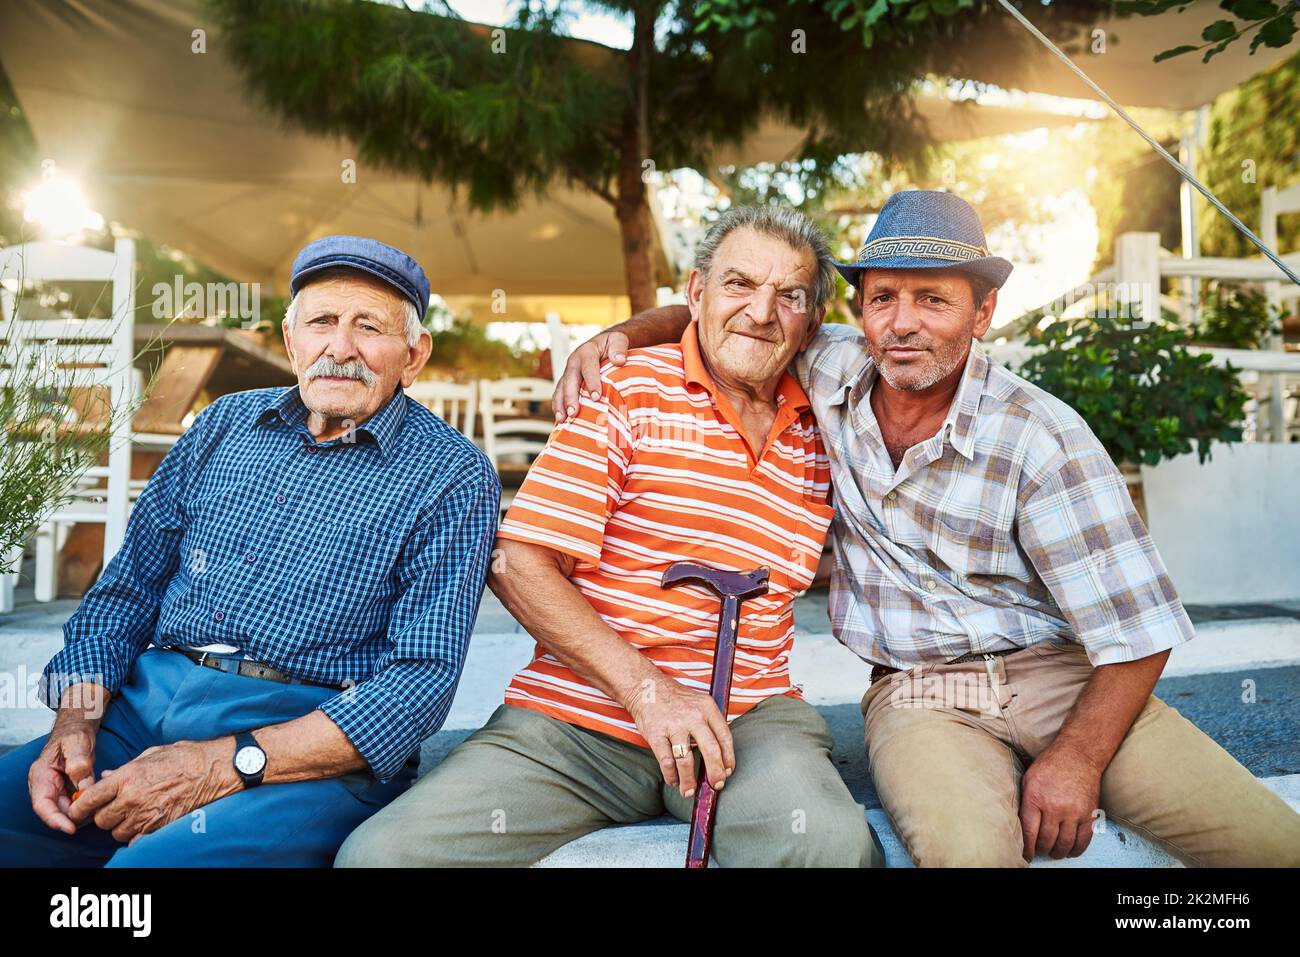 The have been friends since they were kids. Portrait of a group of cheerful senior men sitting together while looking into the camera outside. Stock Photo